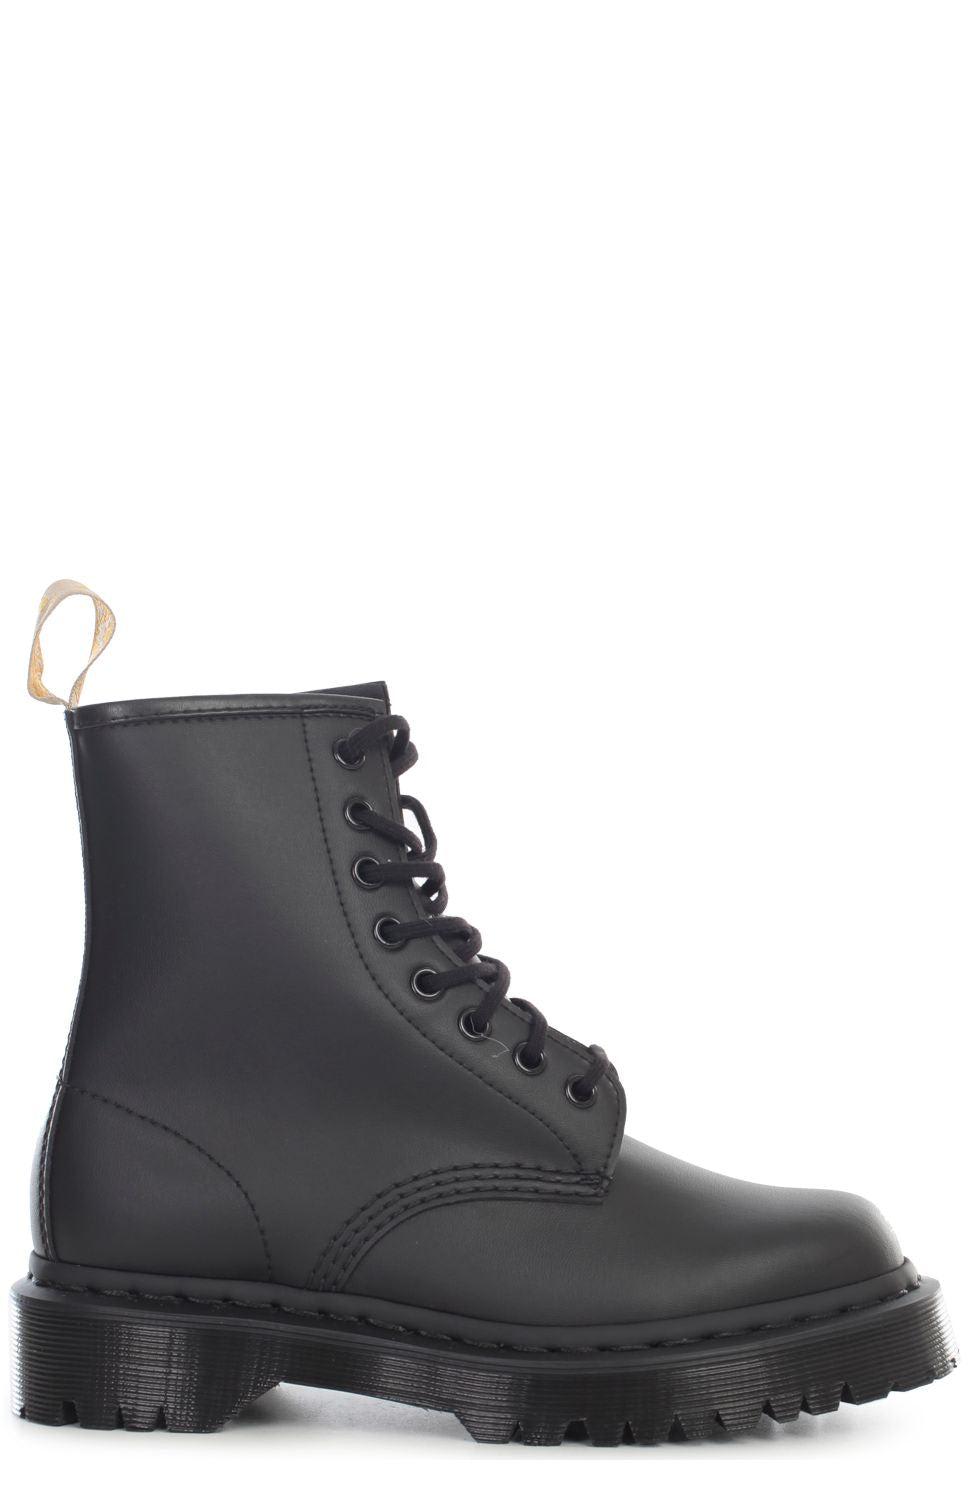 Dr. Martens 1460 8-eye Lace Up Boots